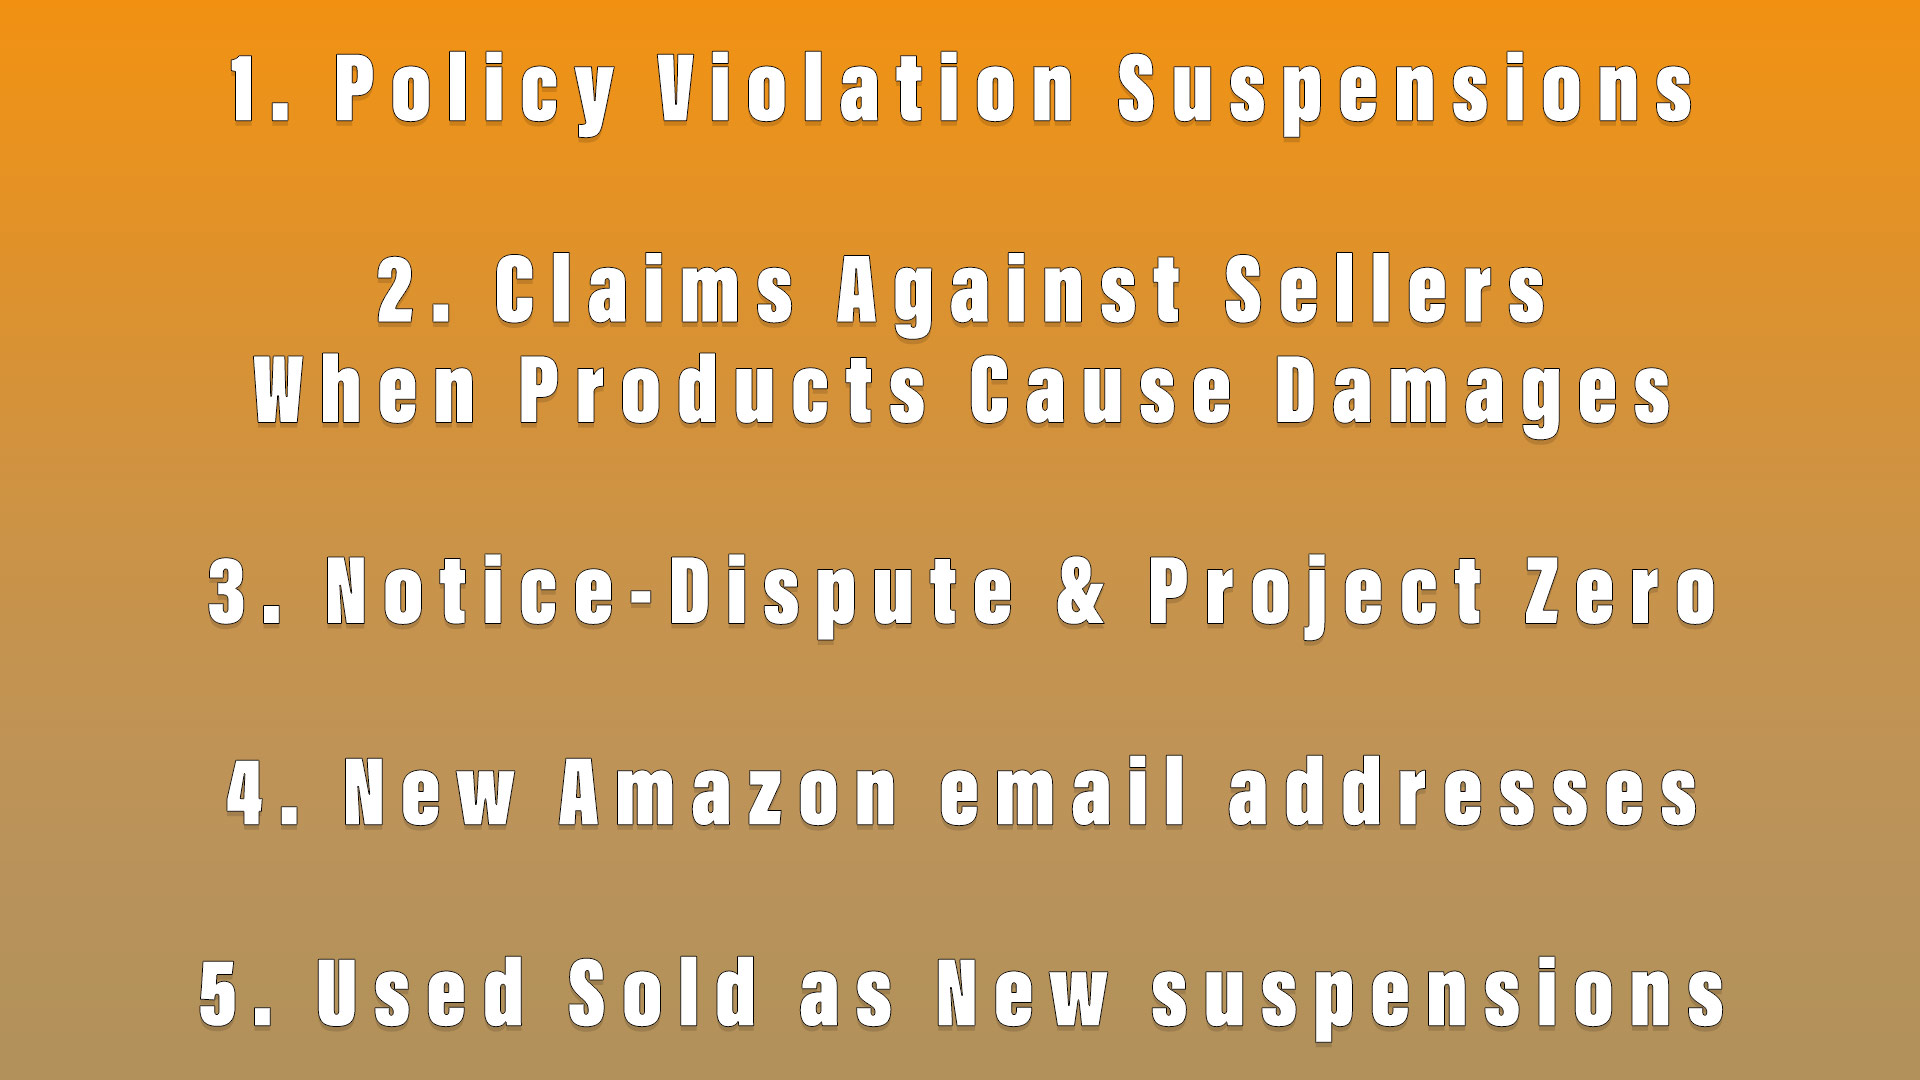 Amazon News: Policy Violation Suspensions, Claims Against Sellers when Products Cause Damages, Notice-Dispute & Project Zero, New Amazon email addresses, Increase in Used Sold as New suspensions